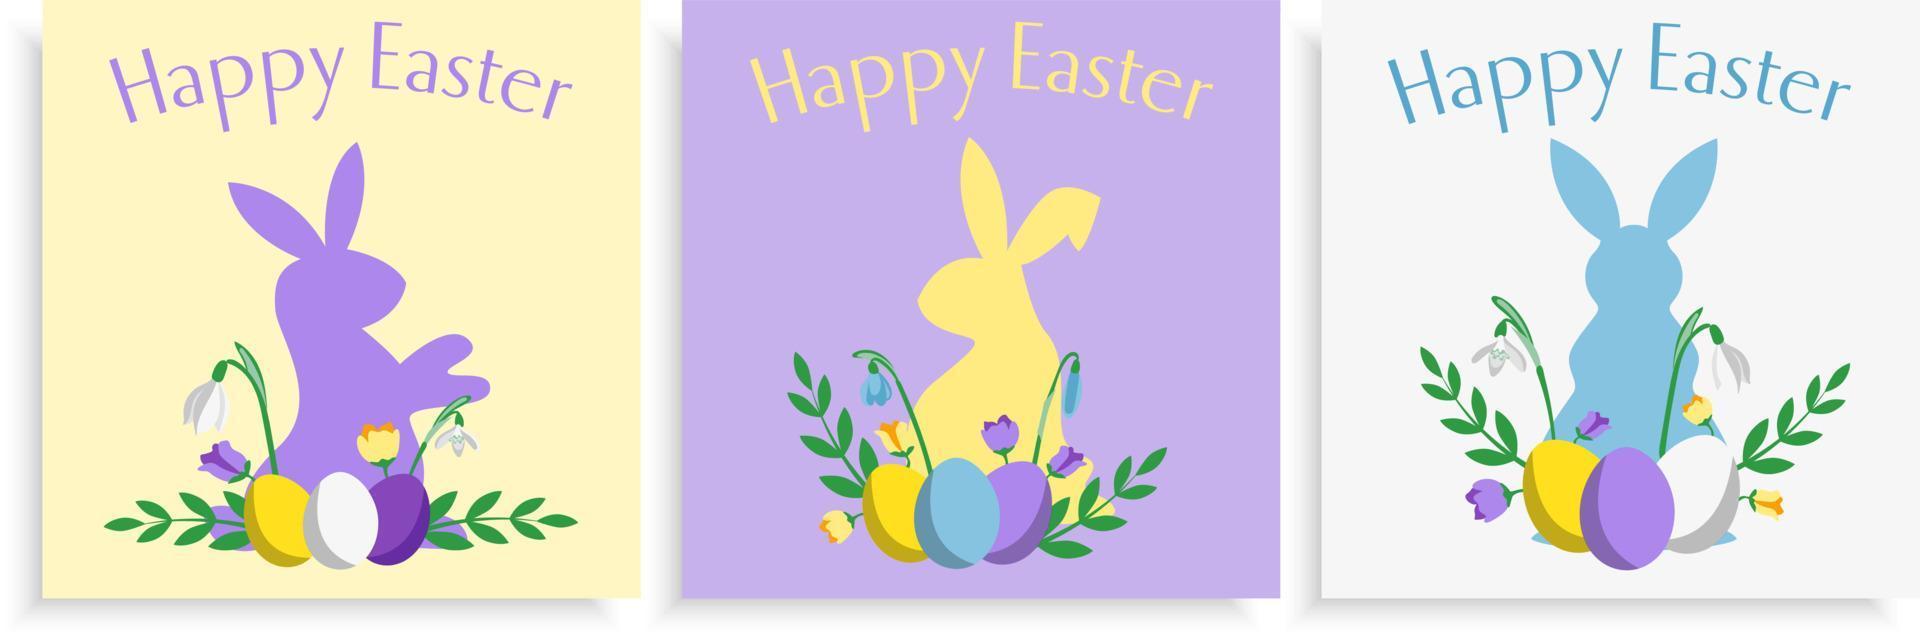 Set of three Easter card design templates with bunnies and flowers flat style pastel coloured vector